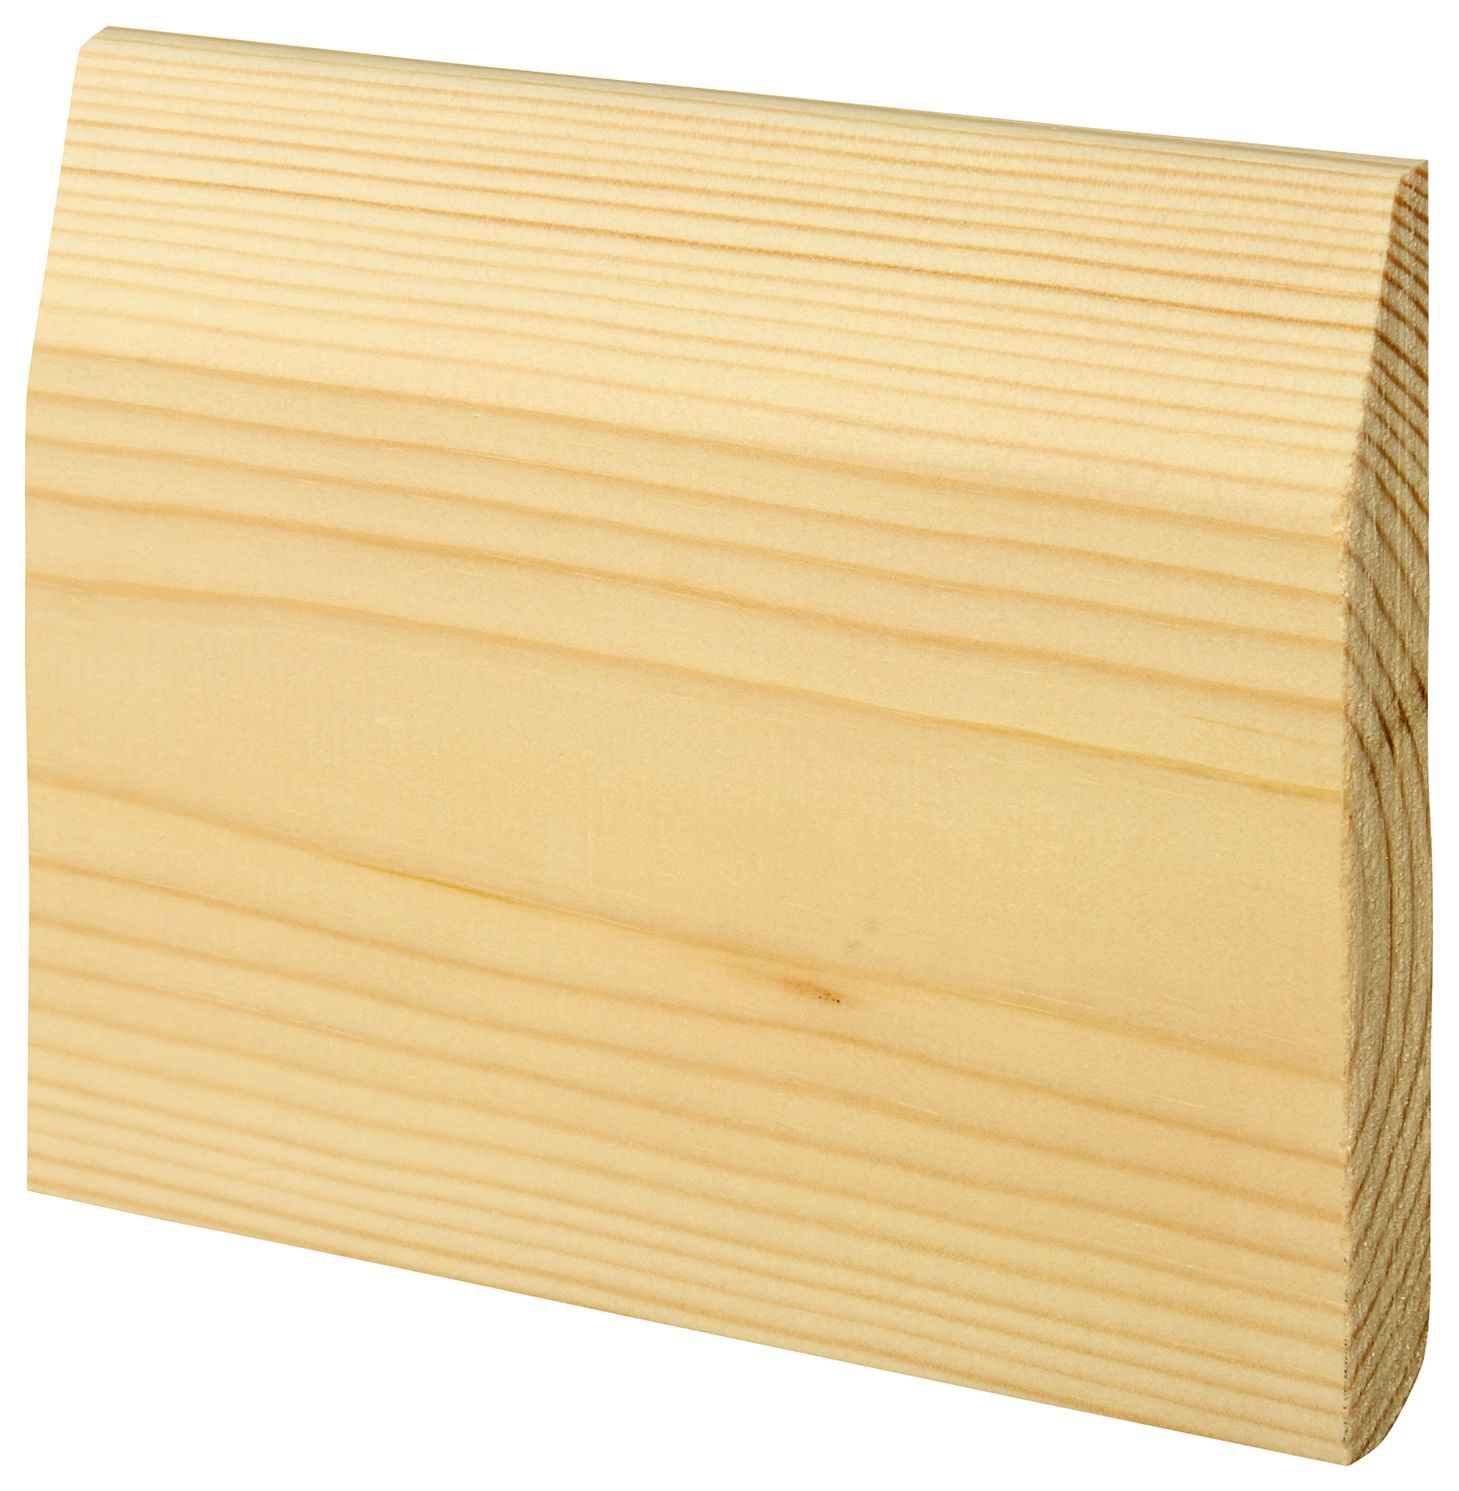 Image of Wickes Chamfered /Bullnose Natural Pine Skirting - 19 x 167 x 4200mm